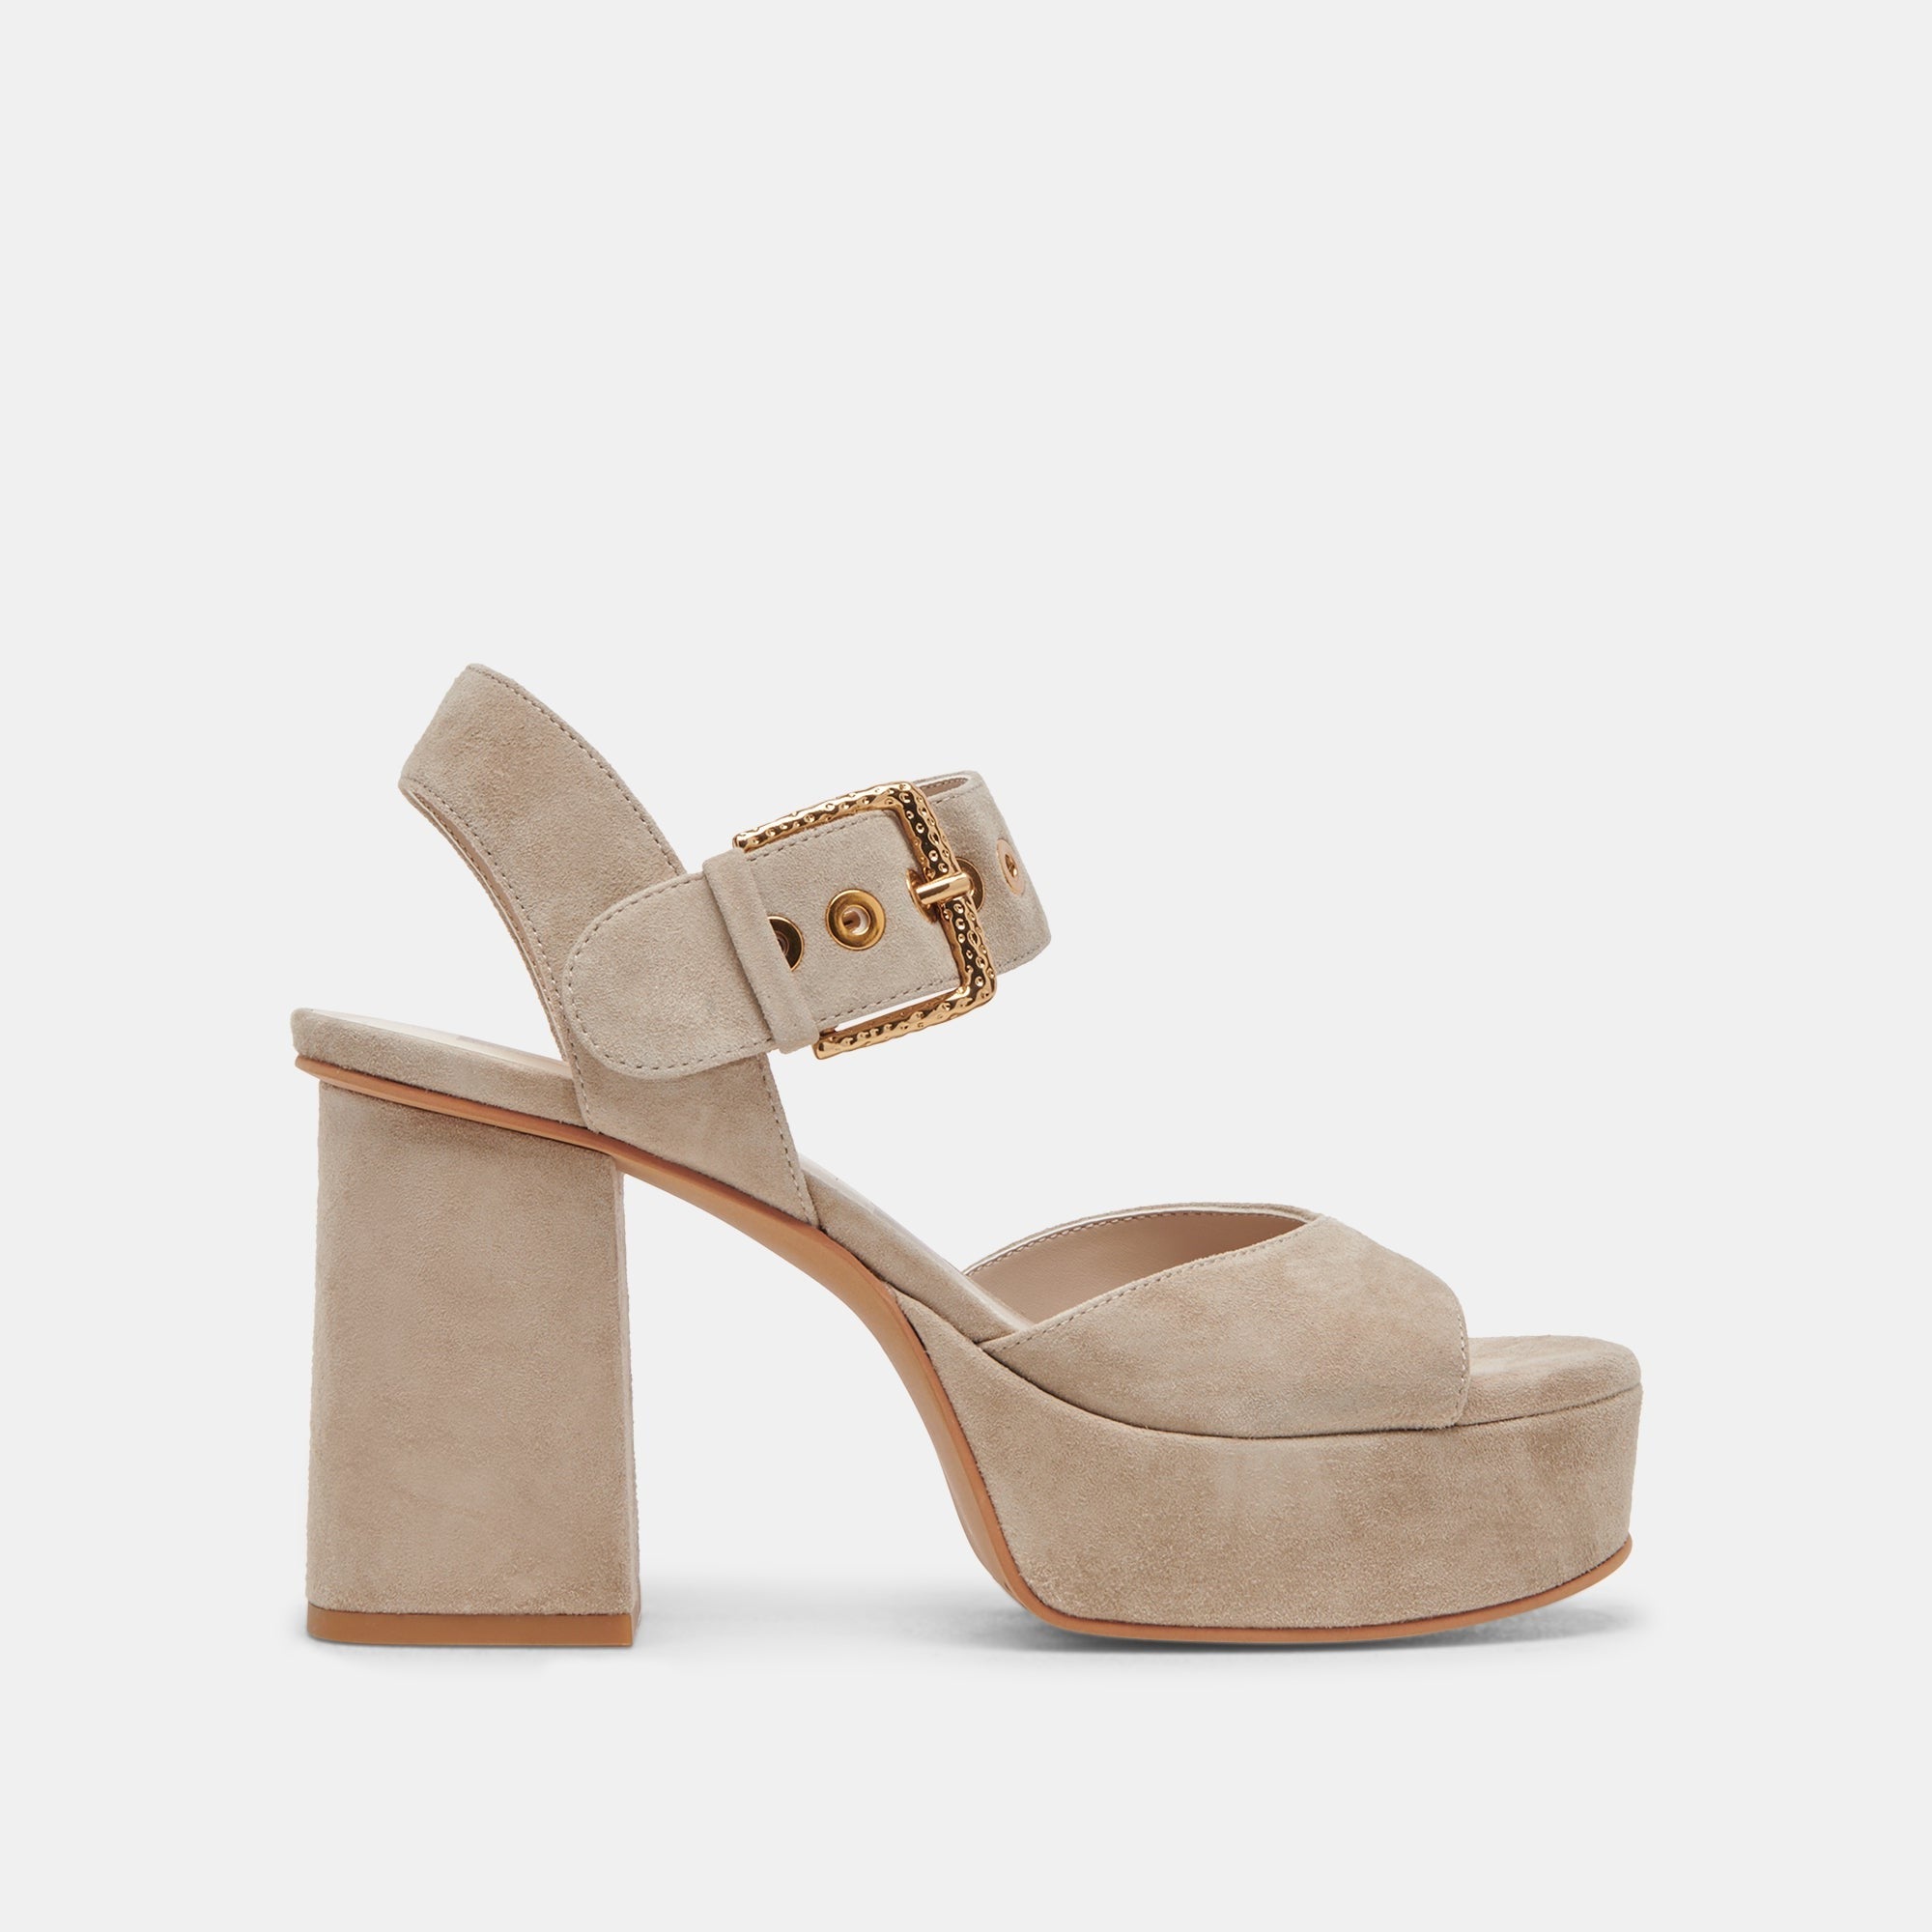 BOBBY HEELS ALMOND SUEDE